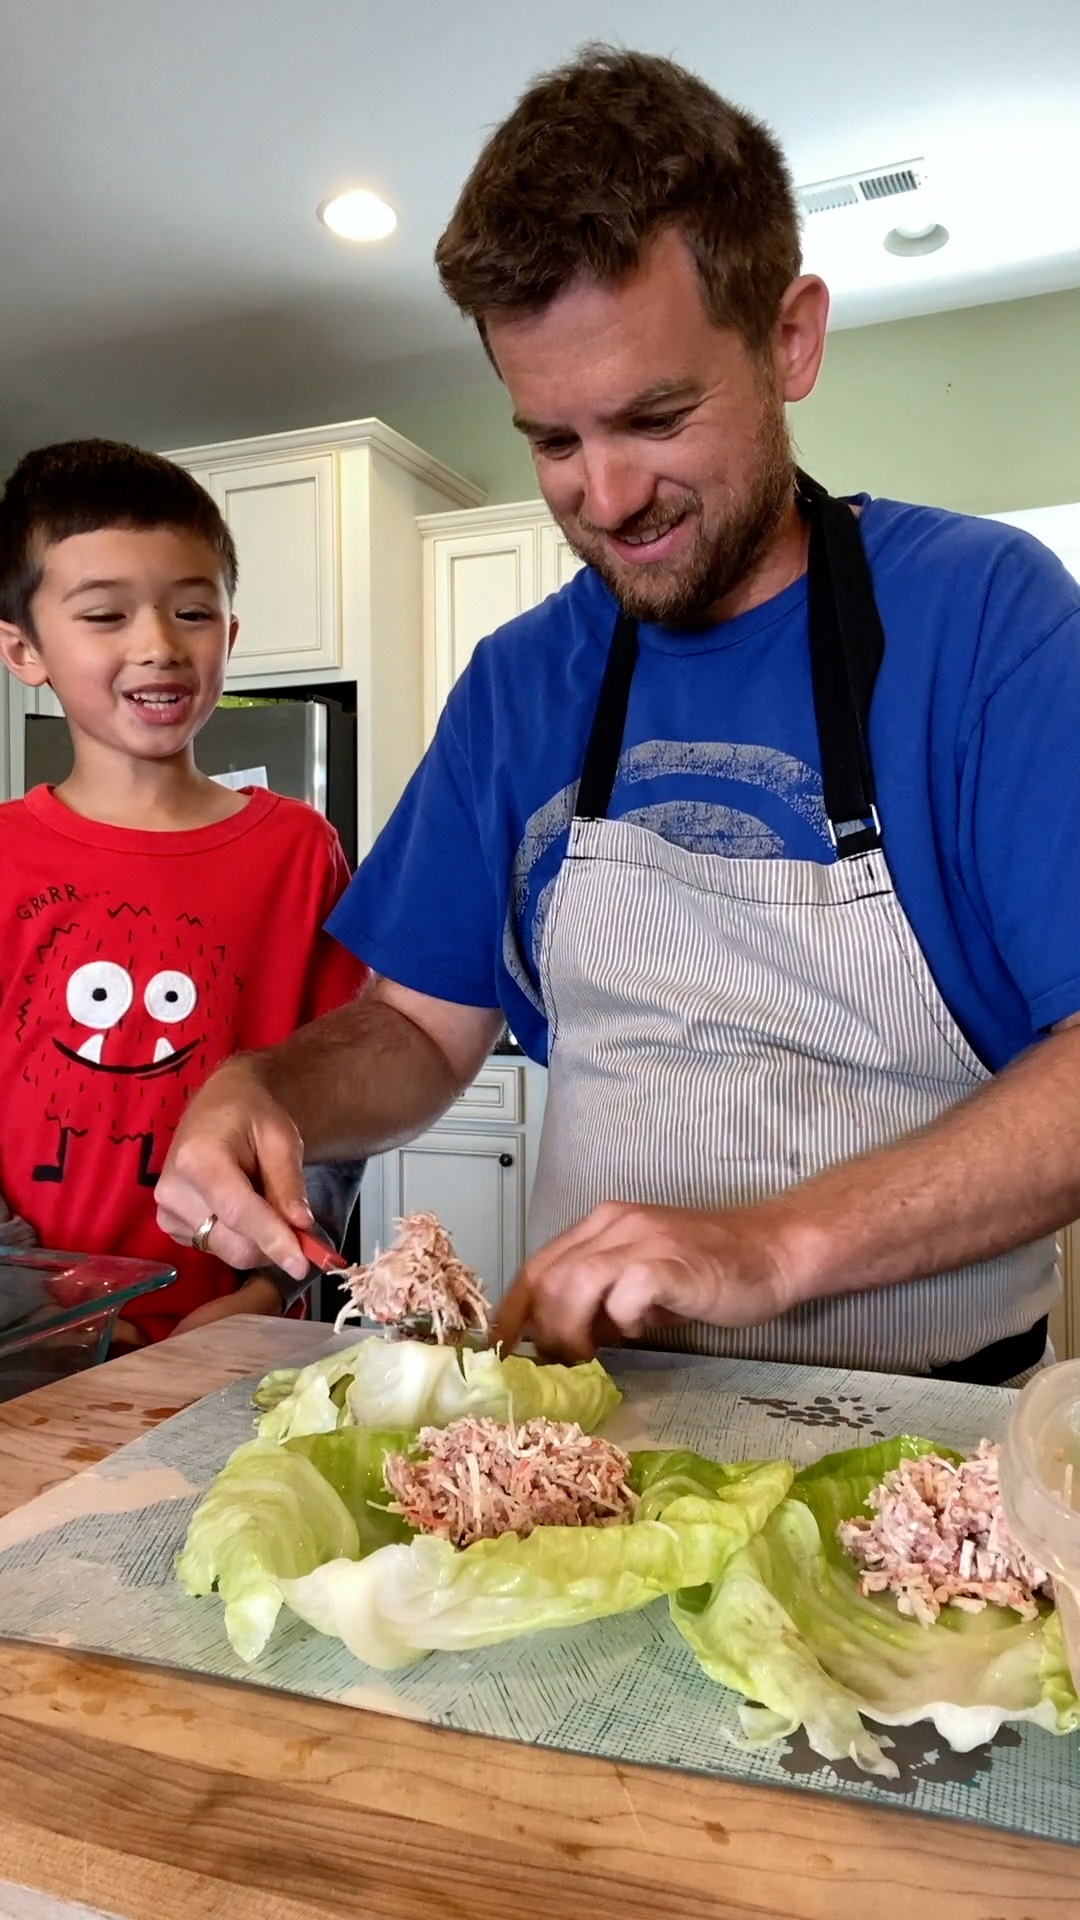 A supplied photo shows Chad Richard Kubanoff and his son are cooking at home.